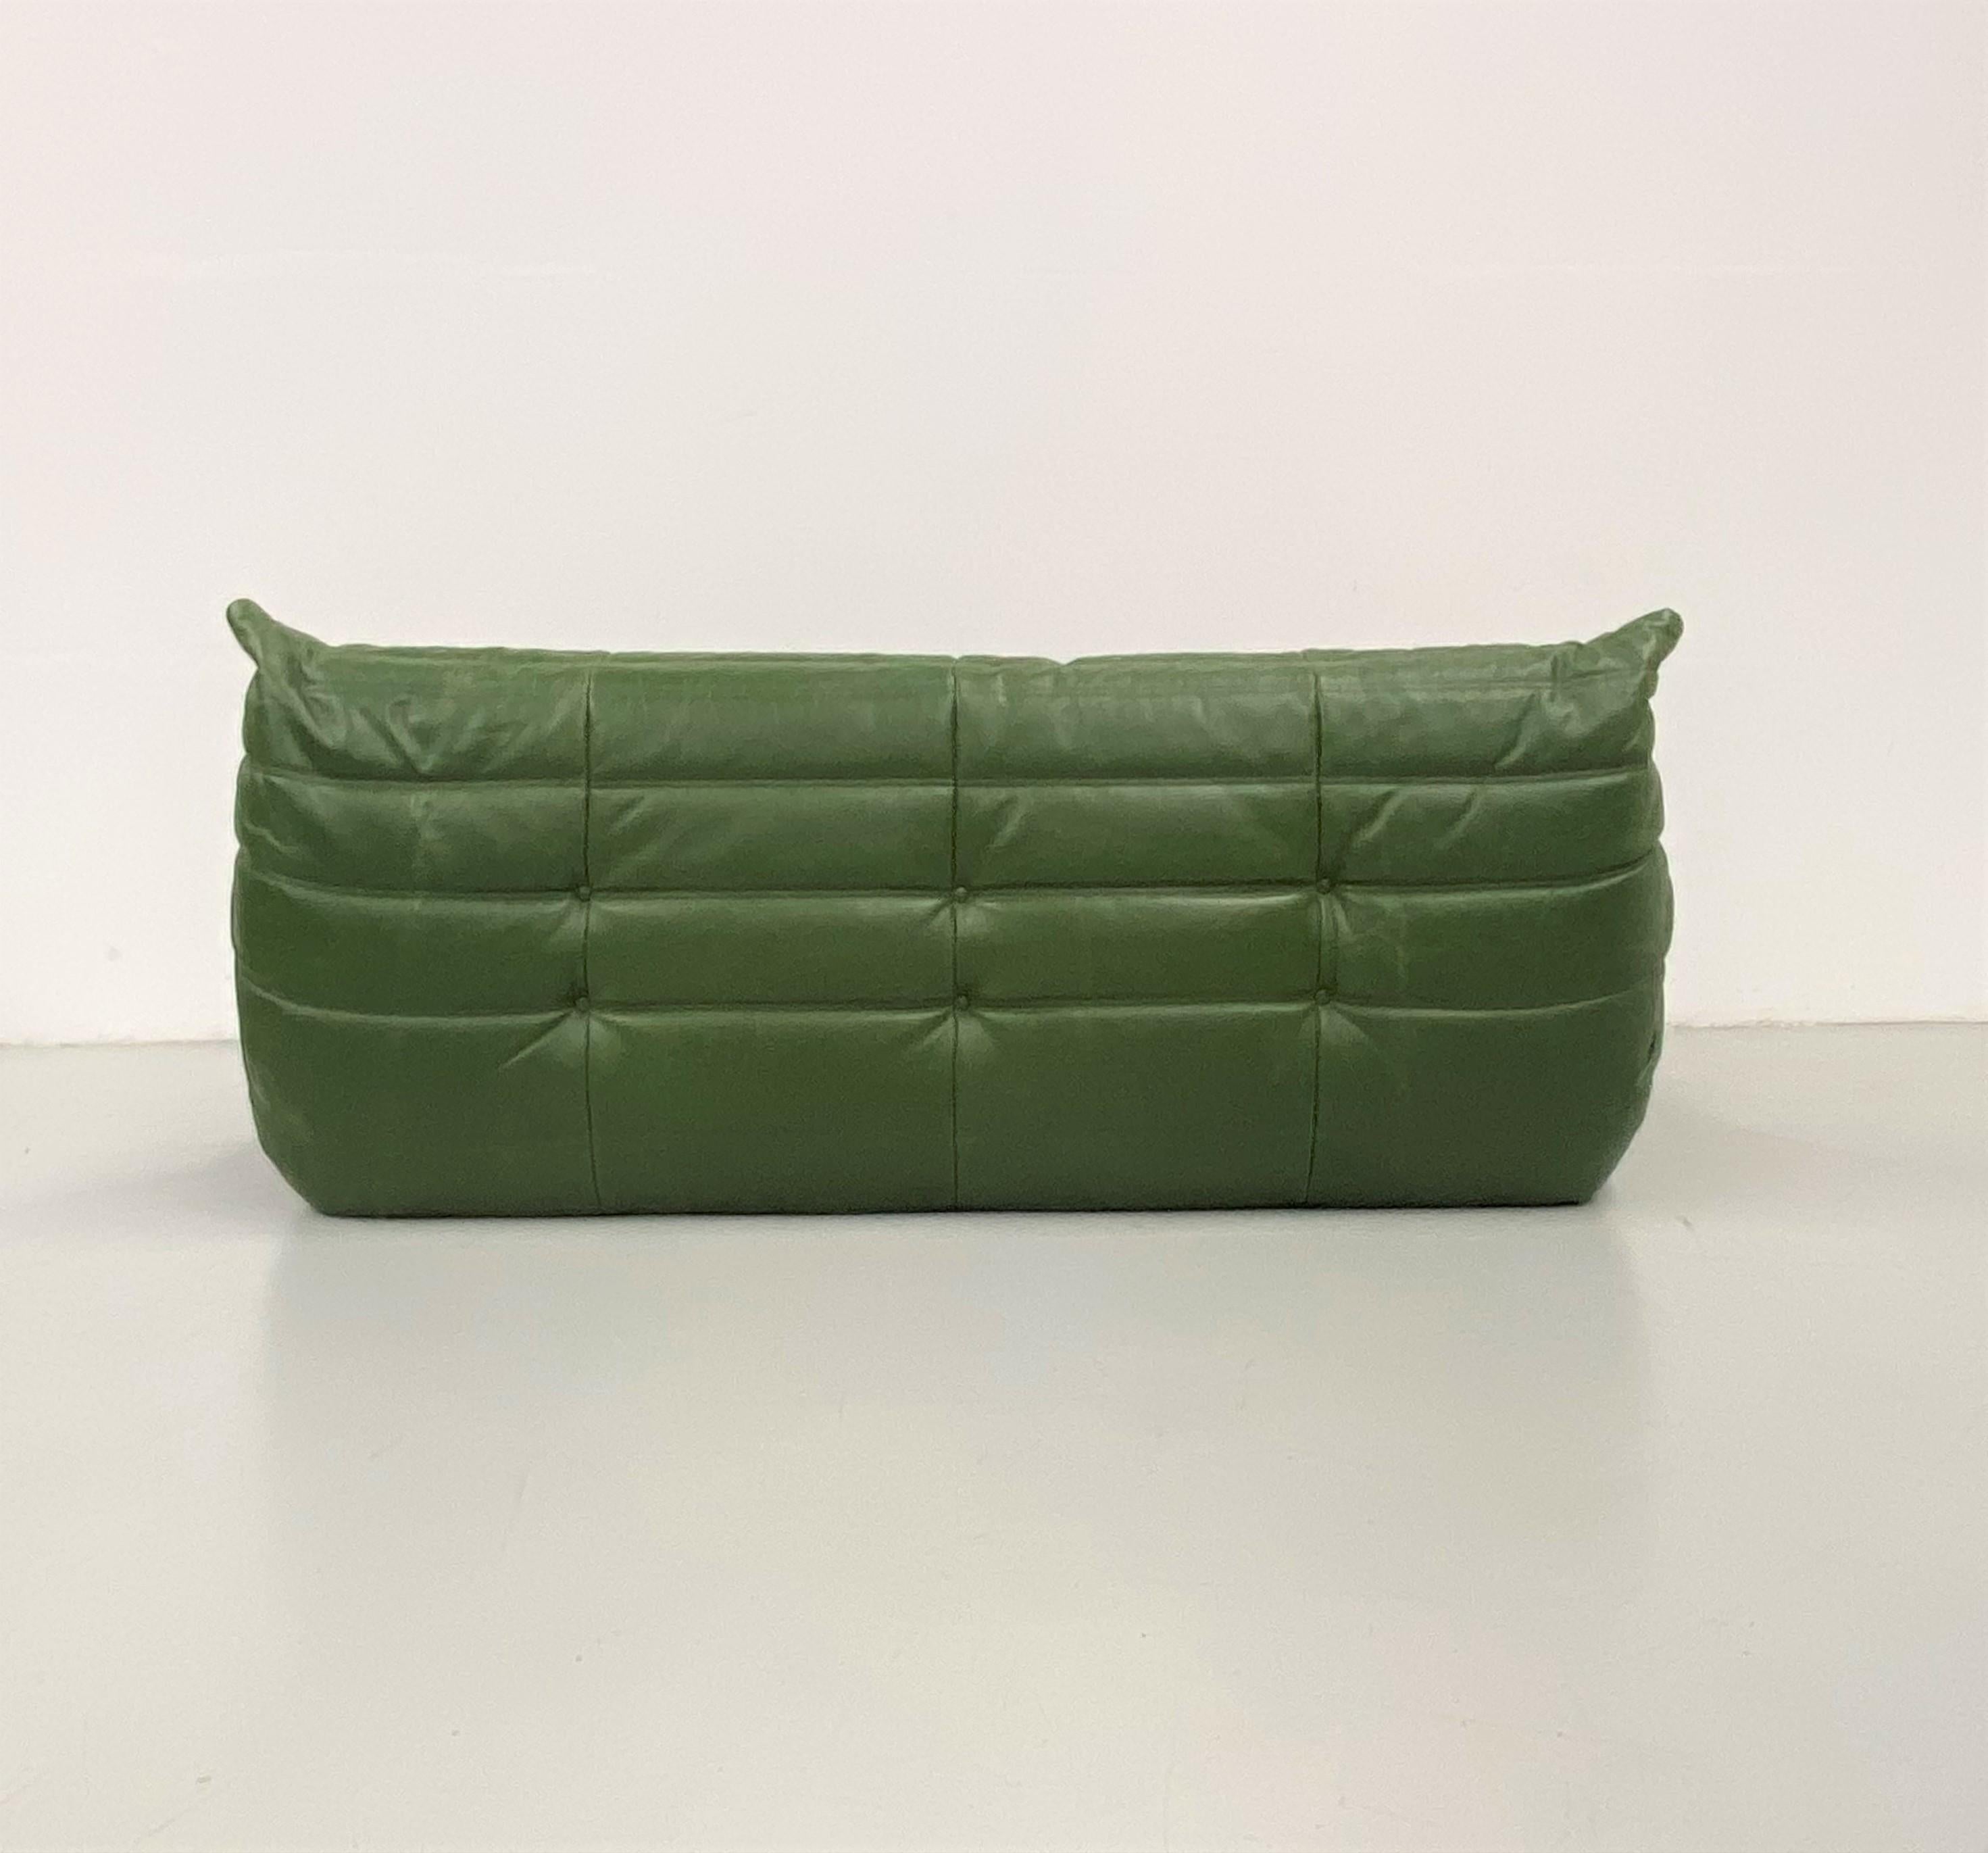 Vintage French Togo Sofa in Green Leather by Michel Ducaroy for Ligne Roset 6